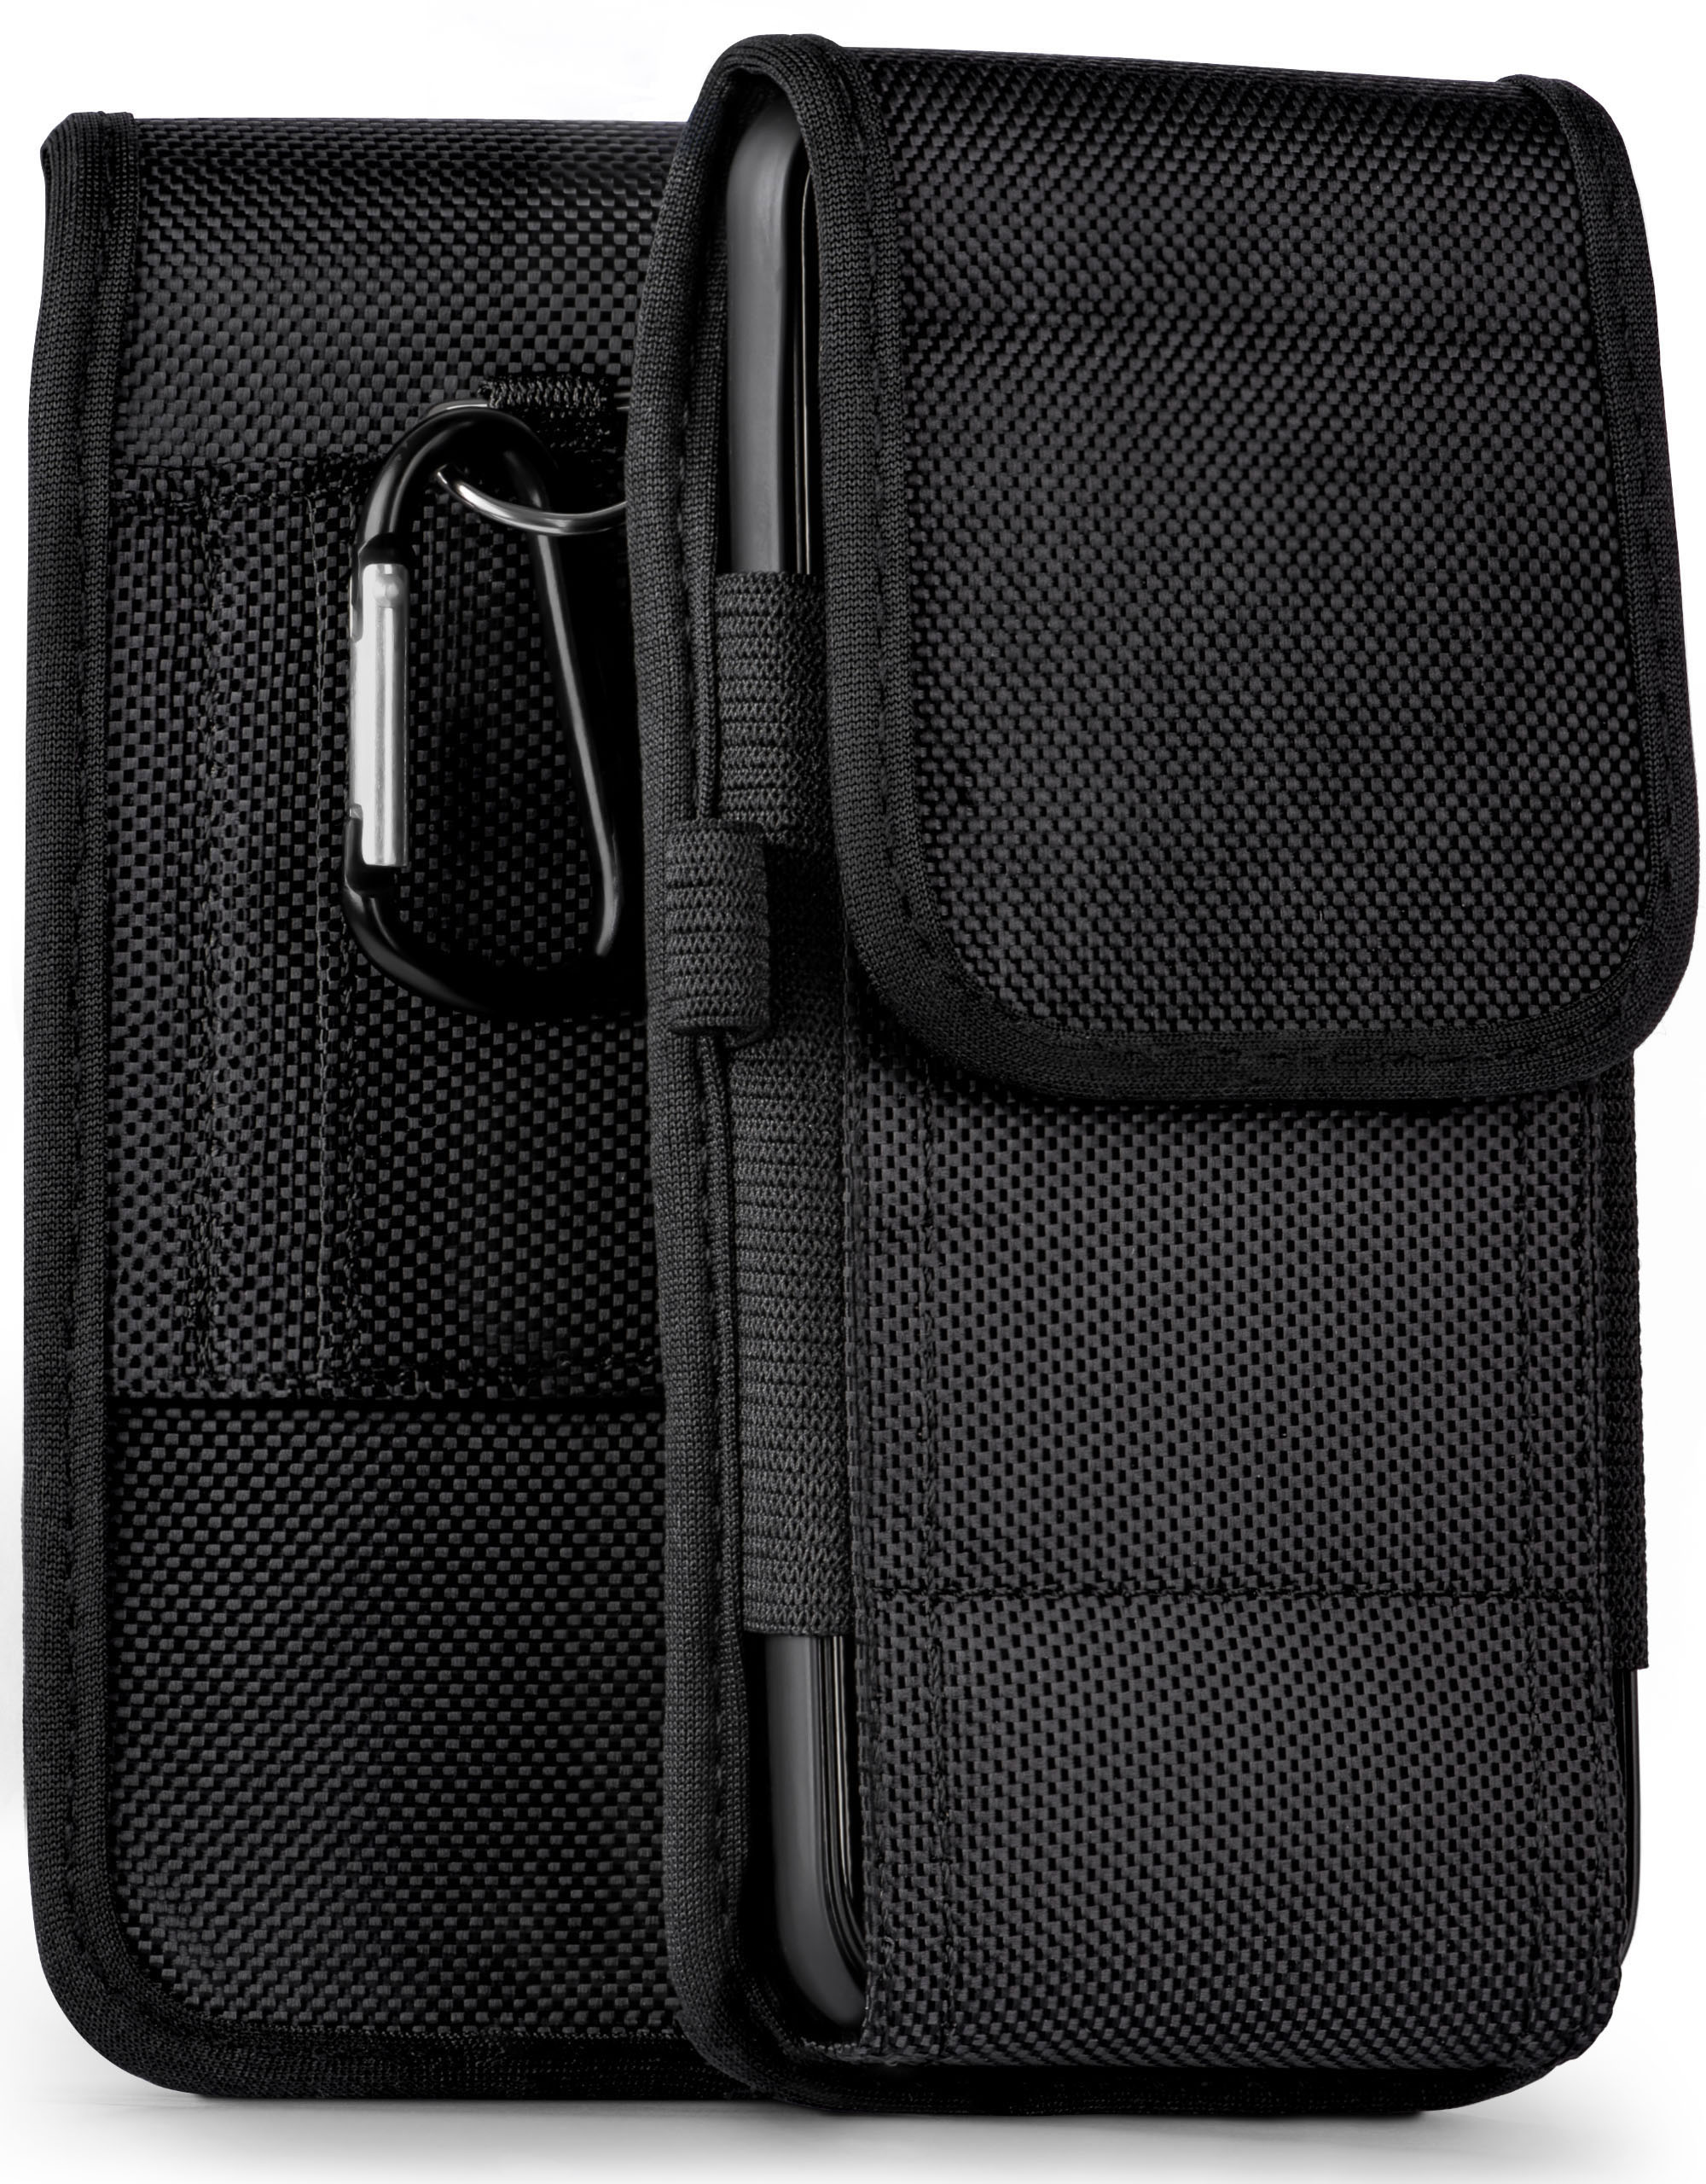 Trail Case, Holster, Lenny Agility MOEX Wiko, 4,